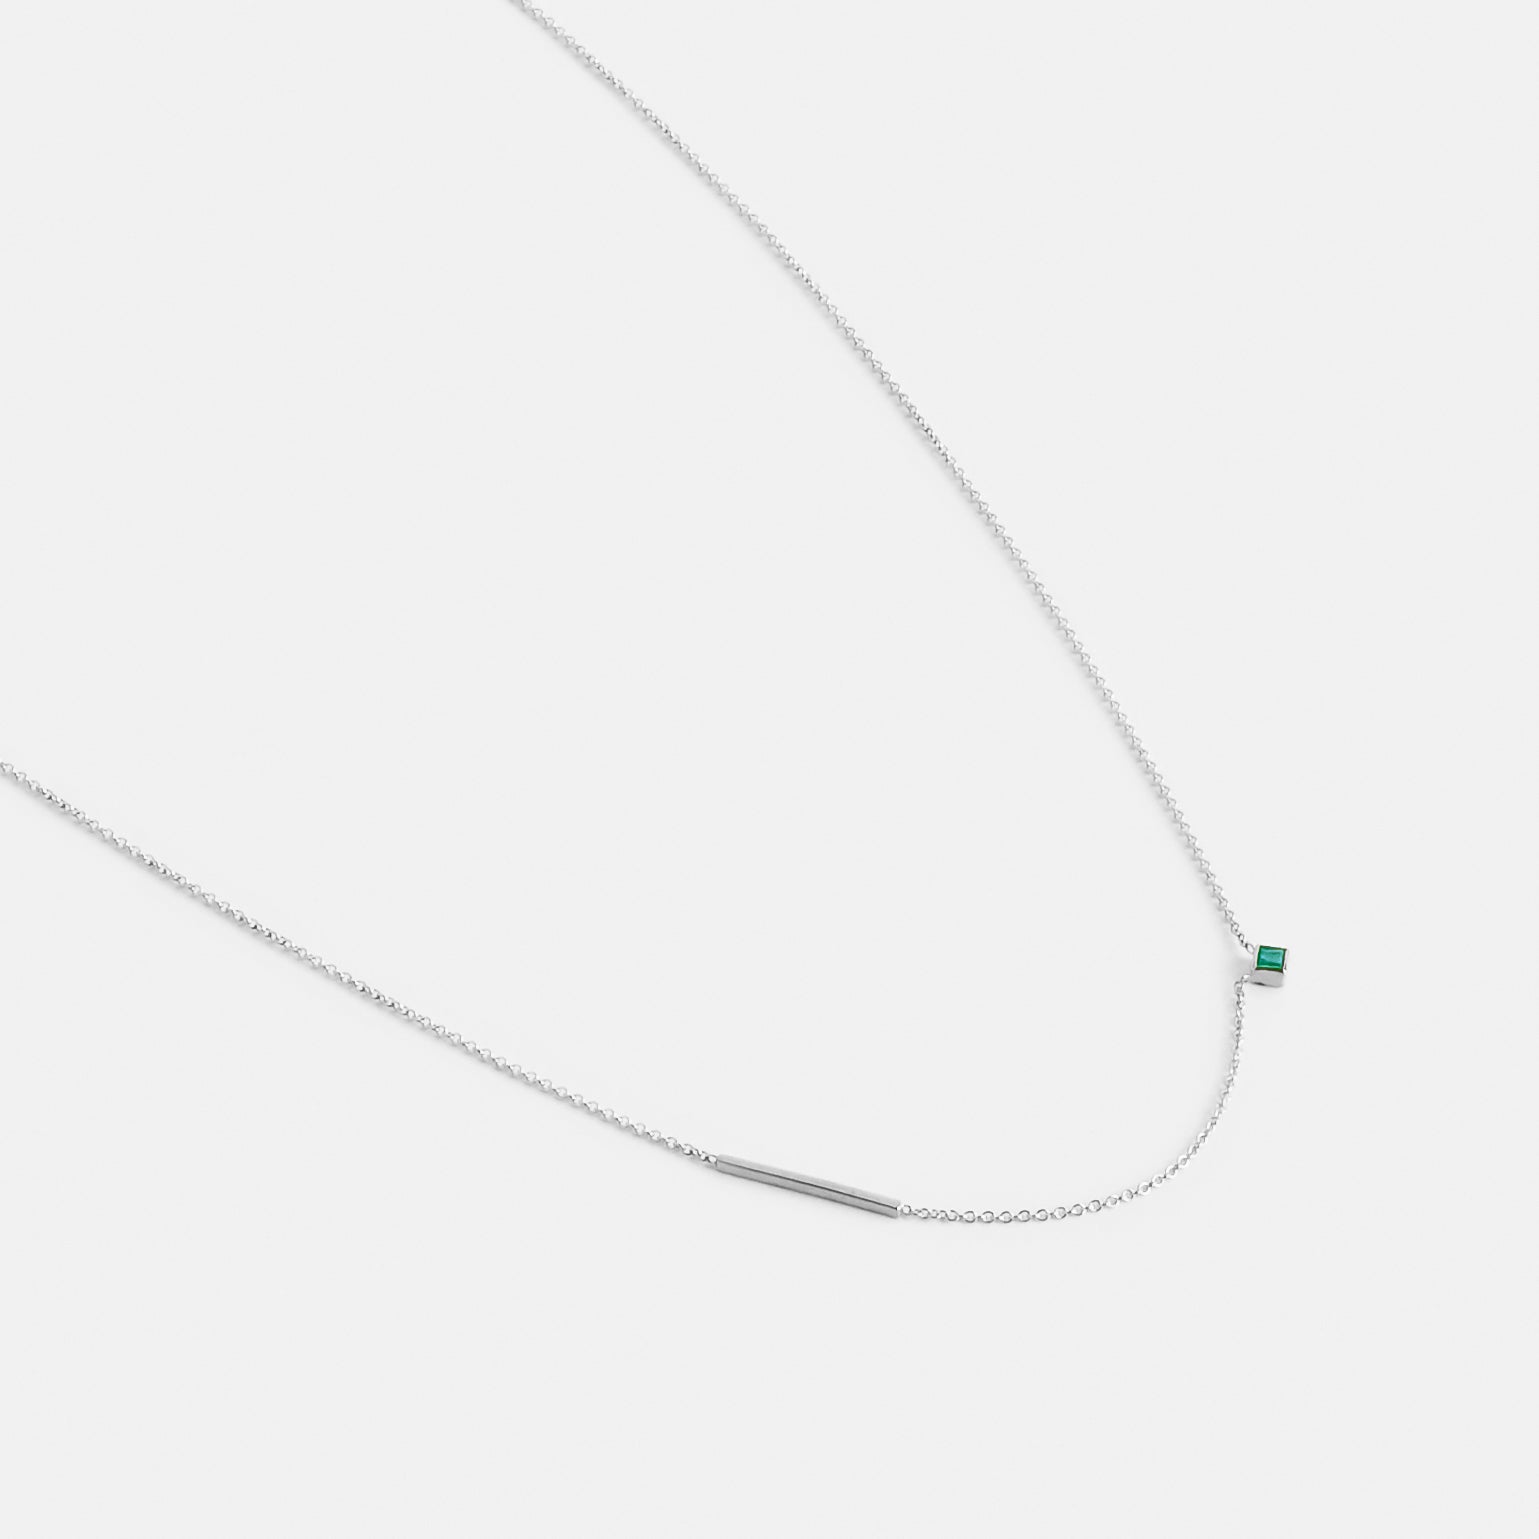 Inu Minimalist Necklace in 14k White Gold Set with Emerald By SHW Fine Jewelry New York City